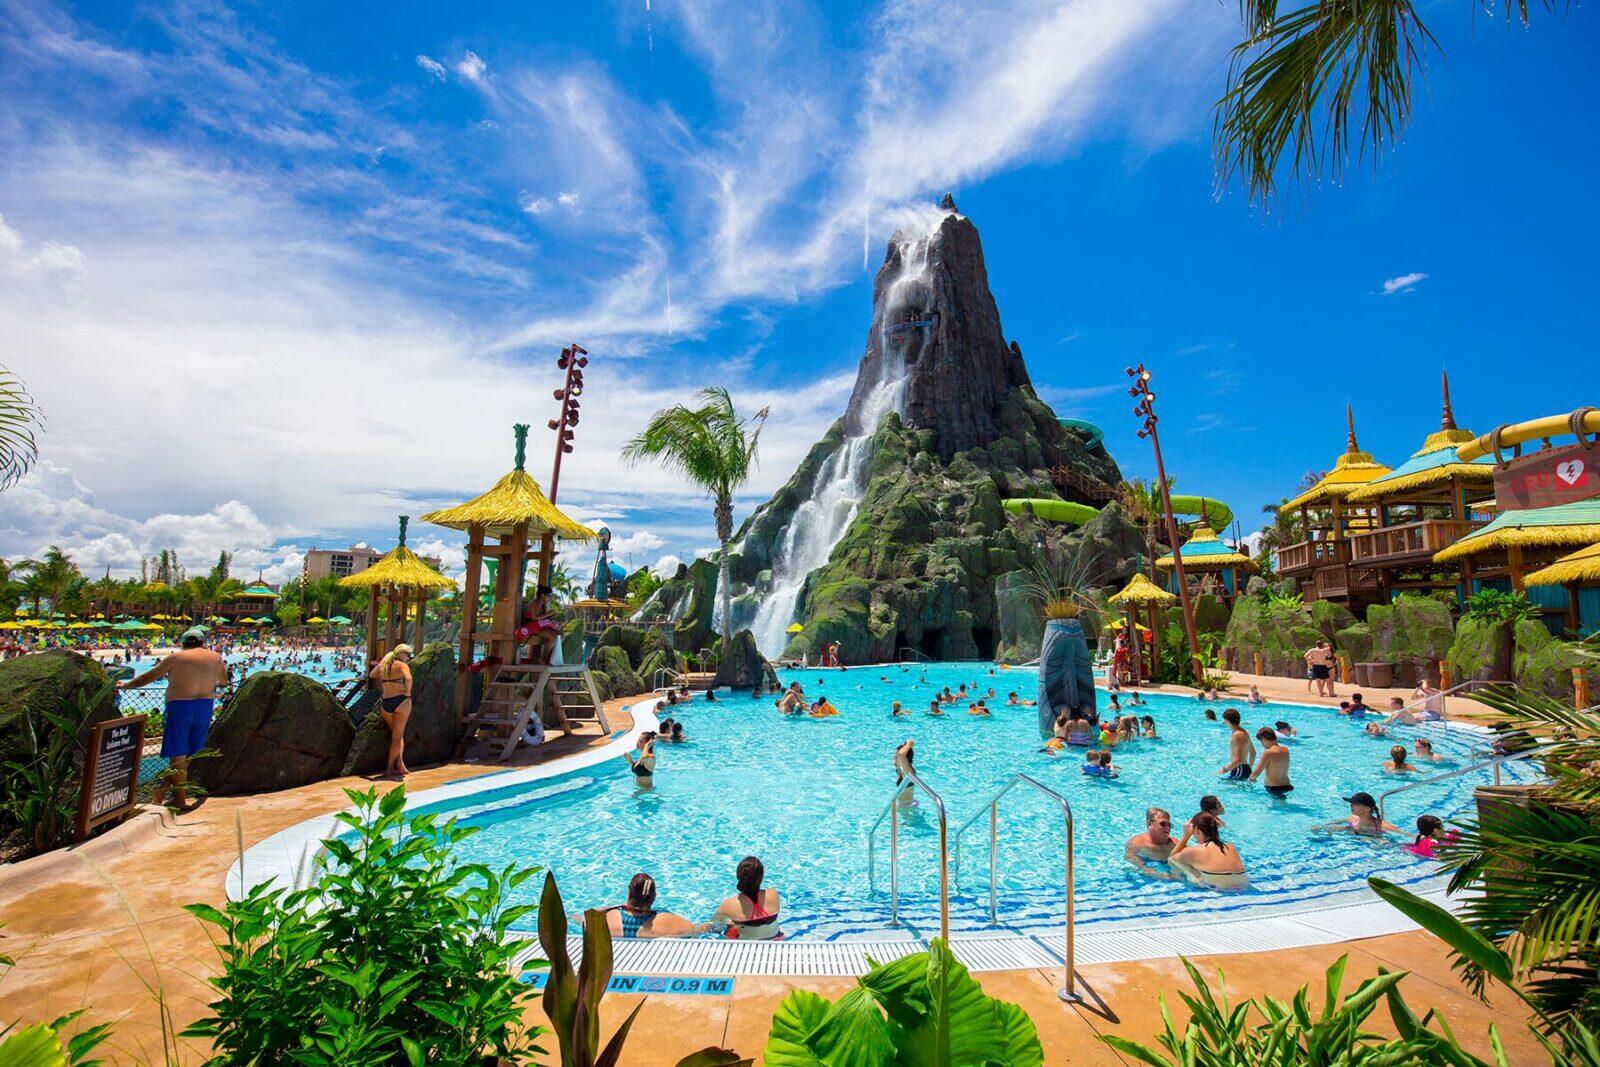 The Best Waterparks in the U.S.